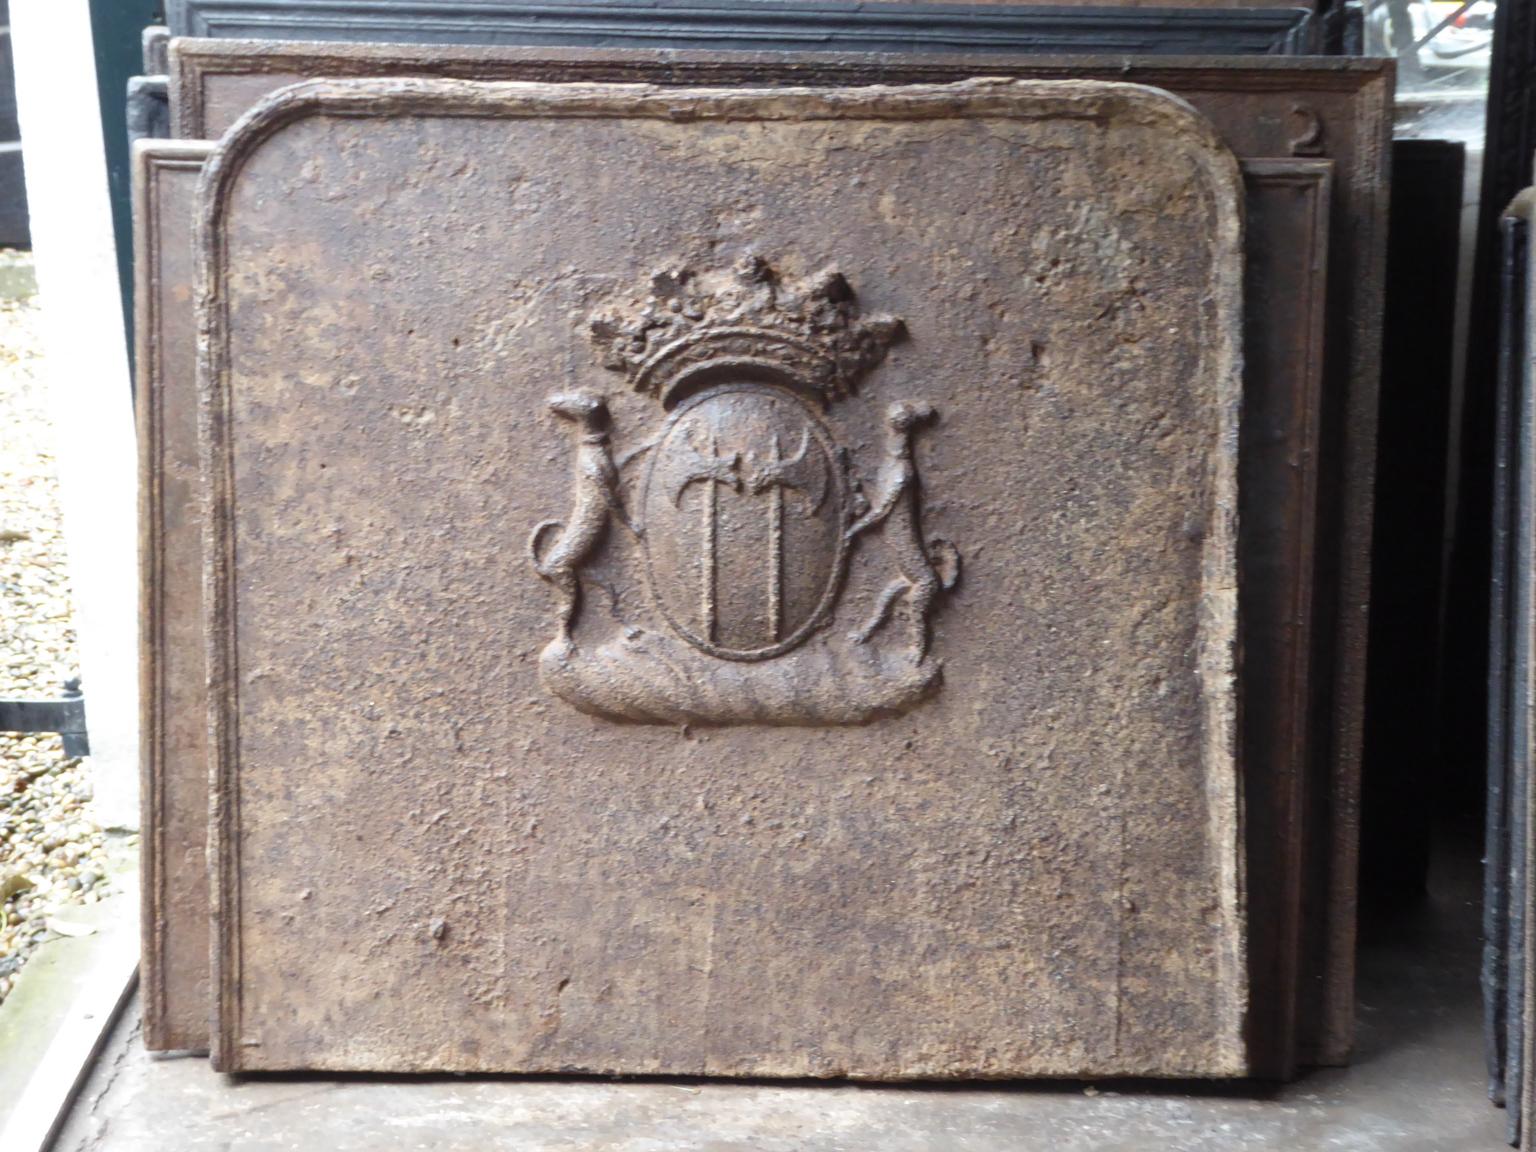 Beautiful, unknown coat of arms fireback.

The fireback is made of cast iron and has a natural brown patina. Upon request it can be made black or pewter at no additional cost. The fireback is in a good condition and does not have cracks.

This